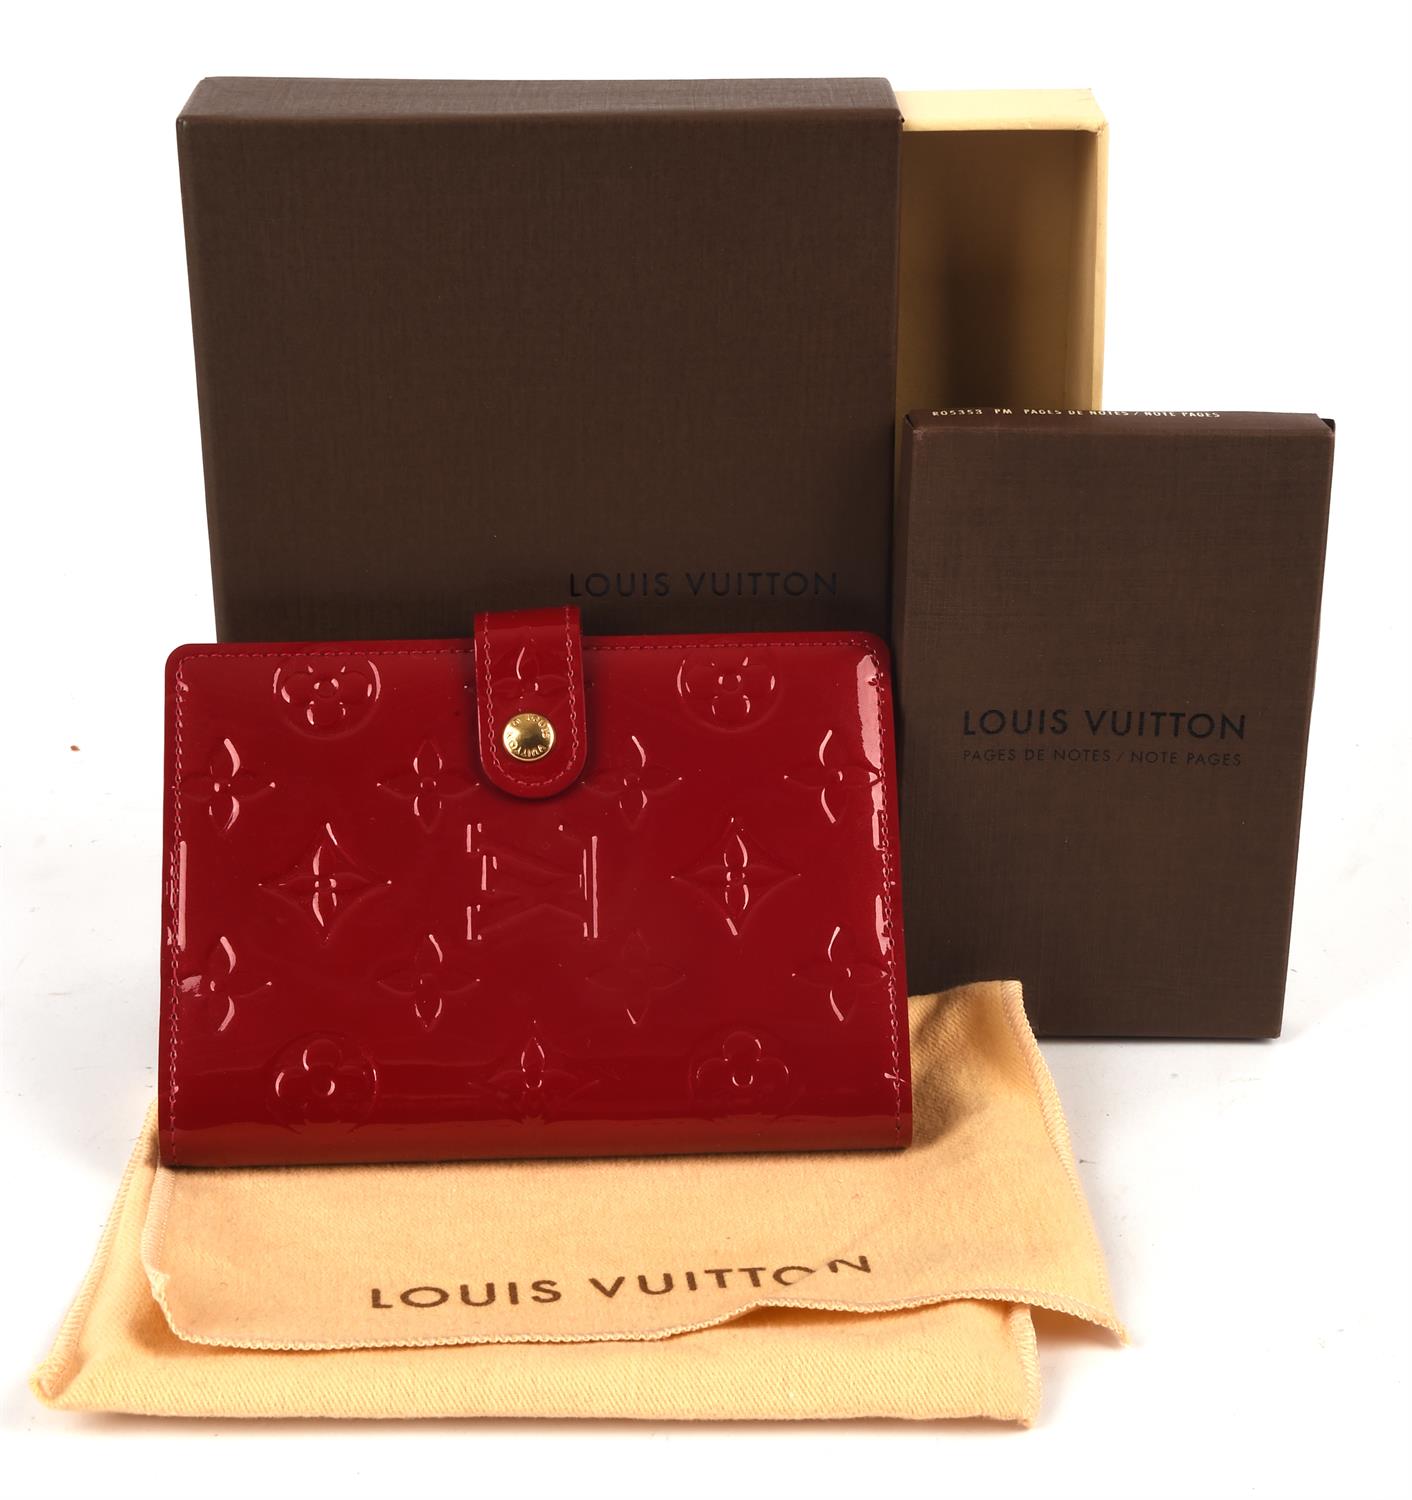 LOUIS VUITTON boxed lipstick red Vernis varnished leather note book with ballpoint pen (untested)